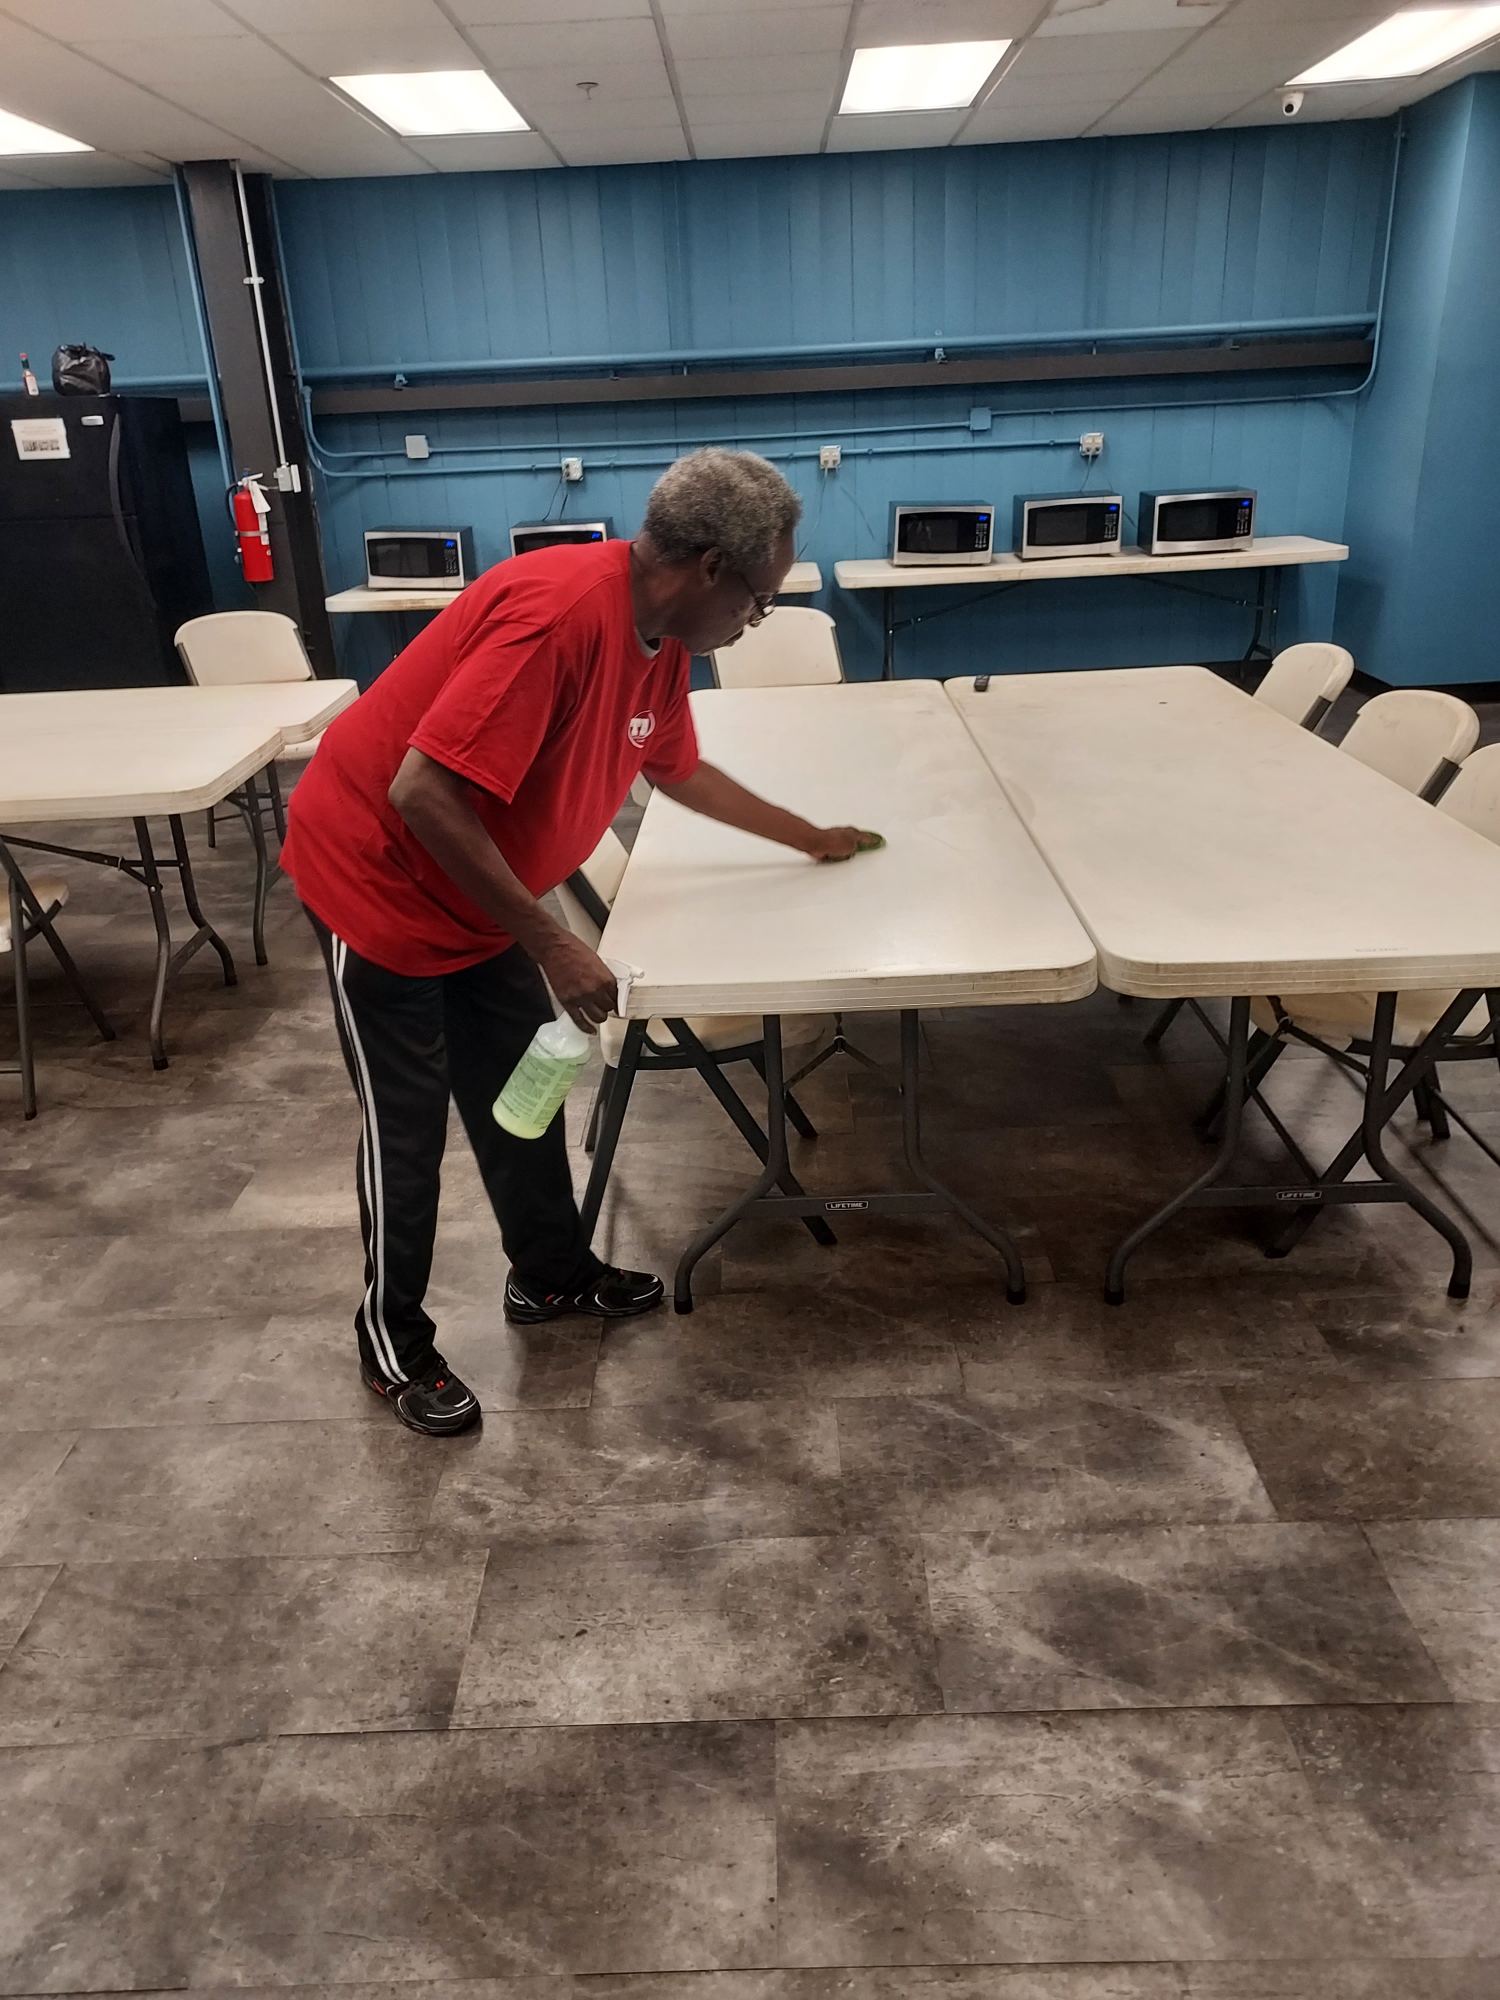 Cleaning Dirty Tables